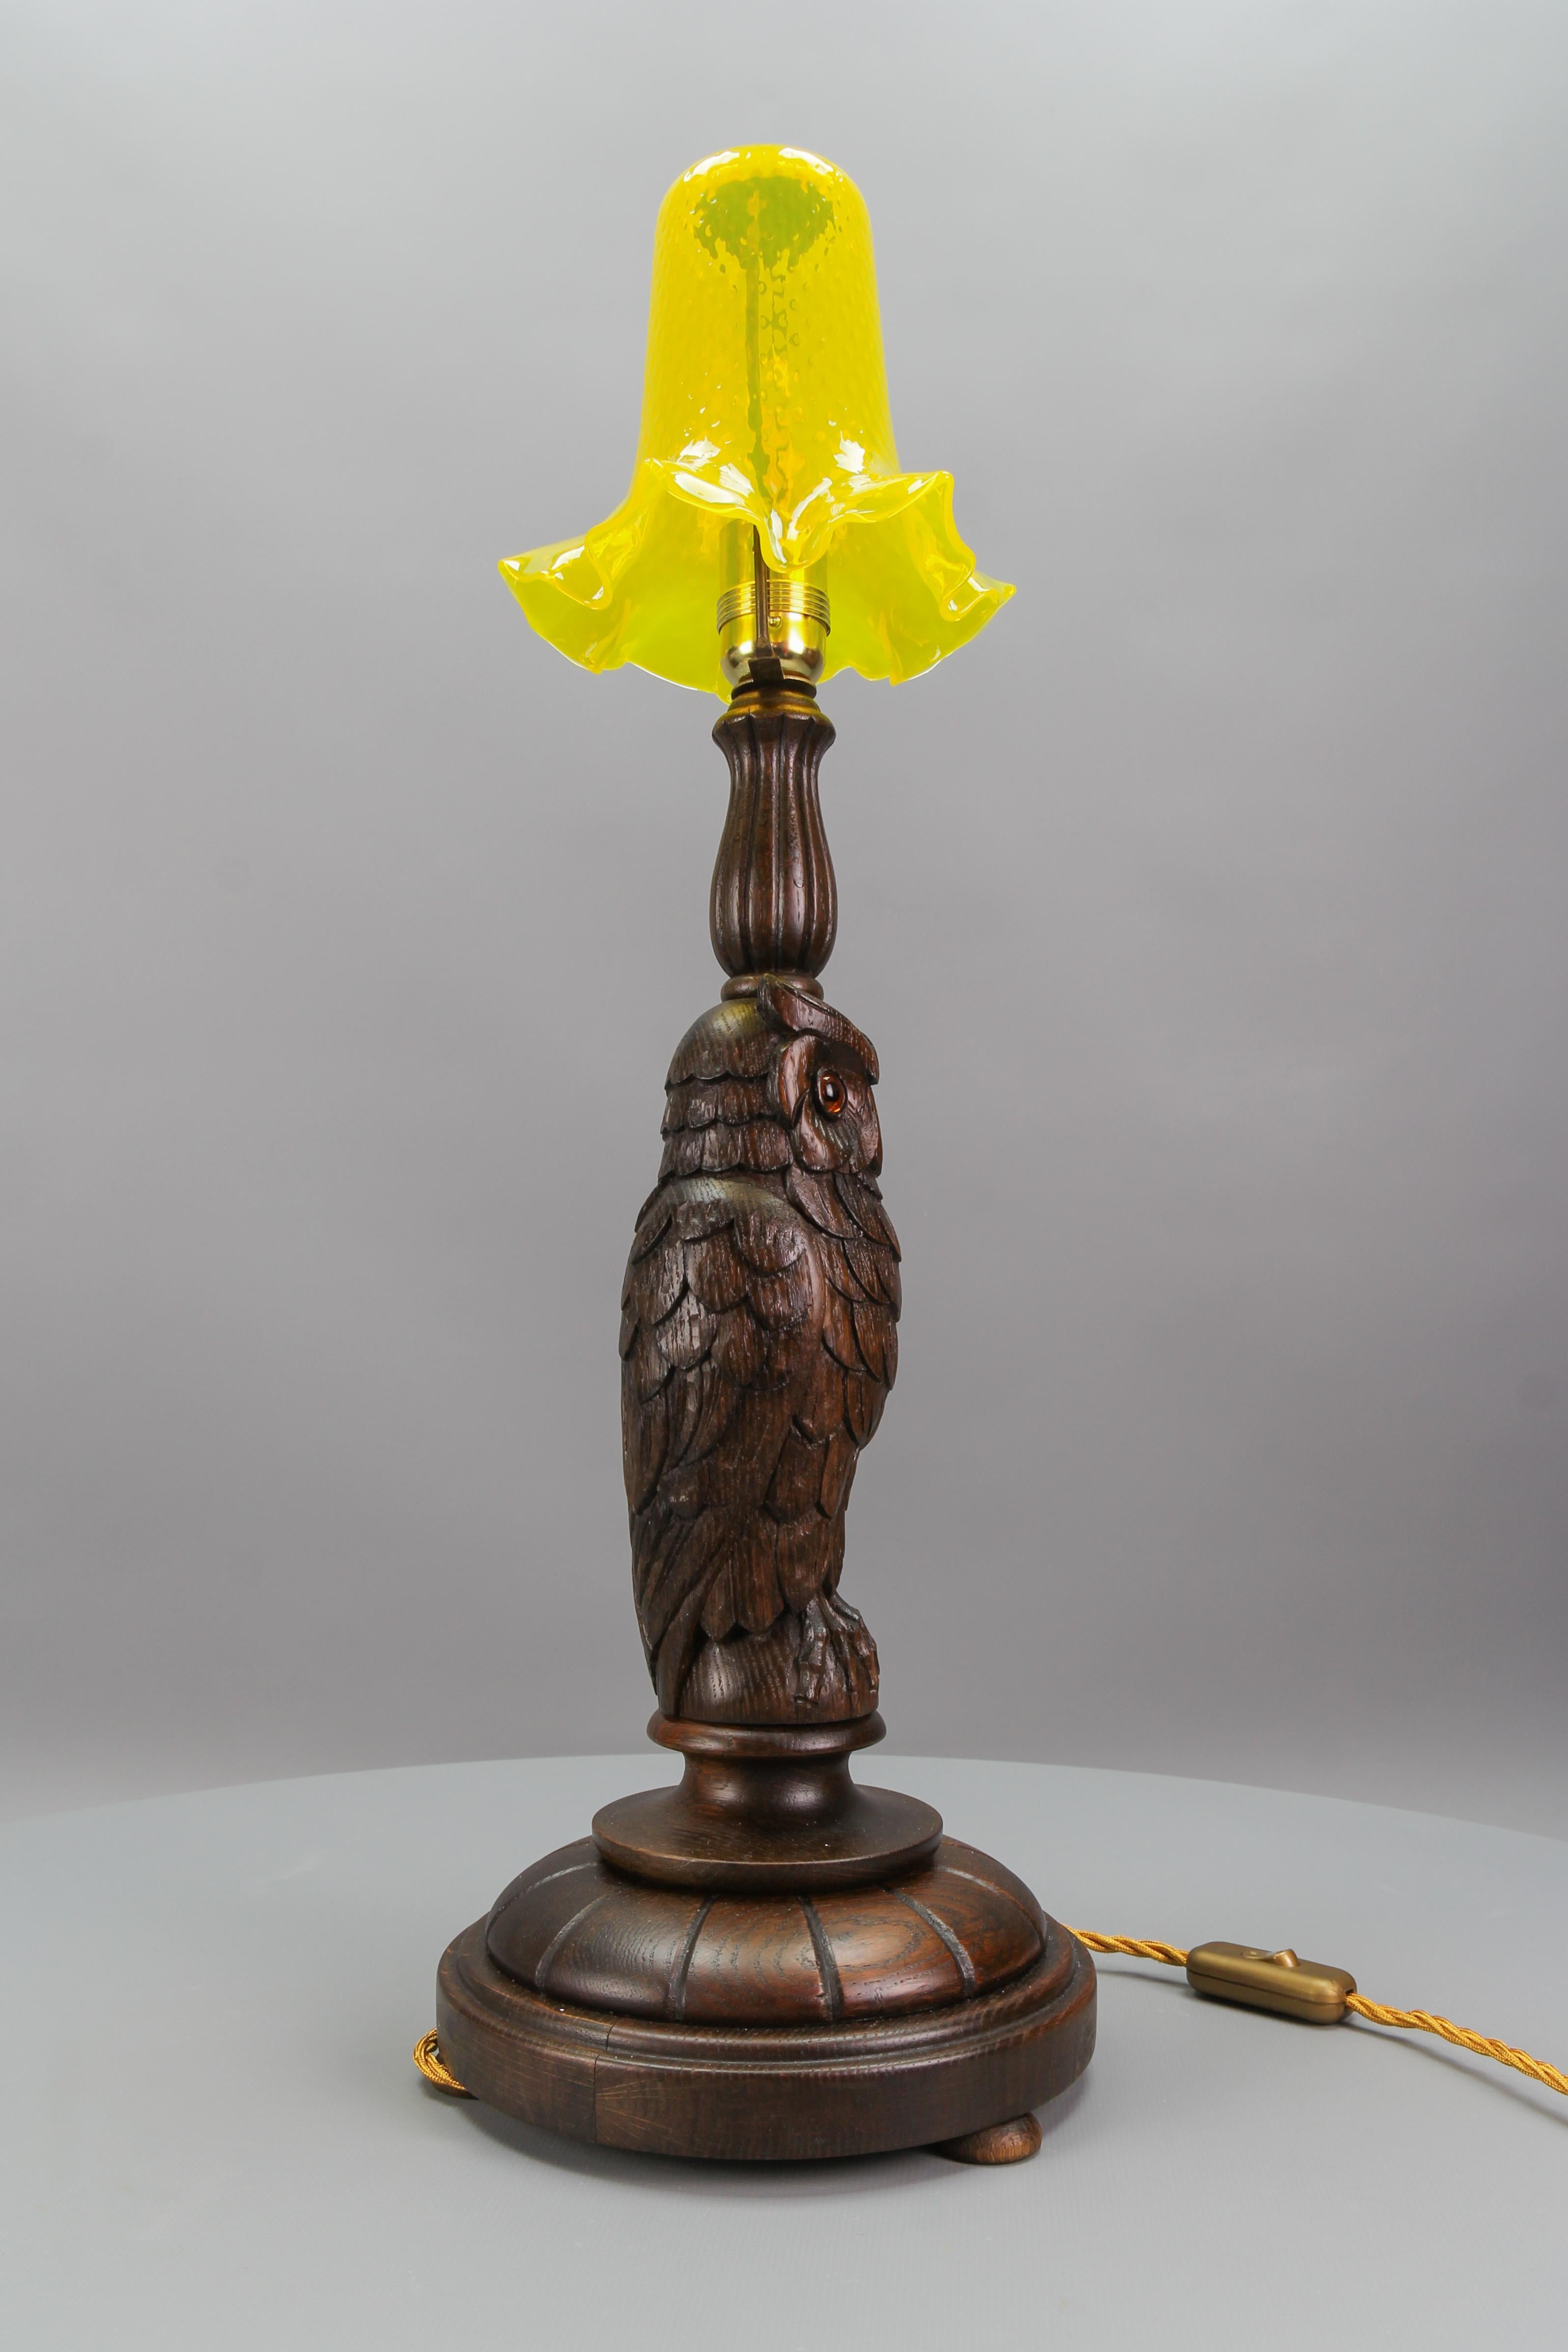 Art Deco Table Lamp with Owl Sculpture and Yellow Glass Lampshade, ca. 1920 For Sale 1